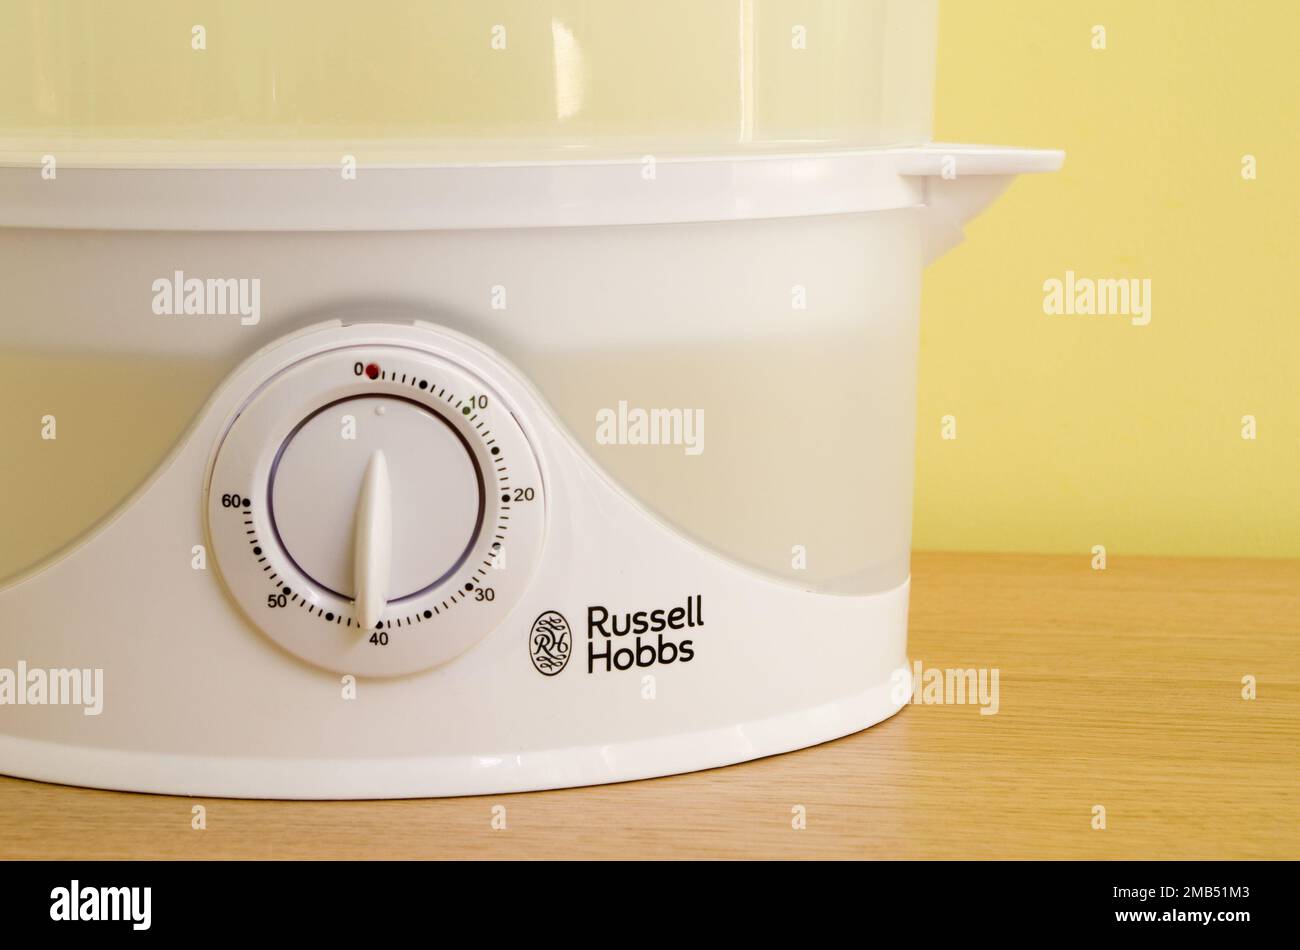 Russell Hobbs Electric Food Steamer Appliance, UK Stock Photo - Alamy